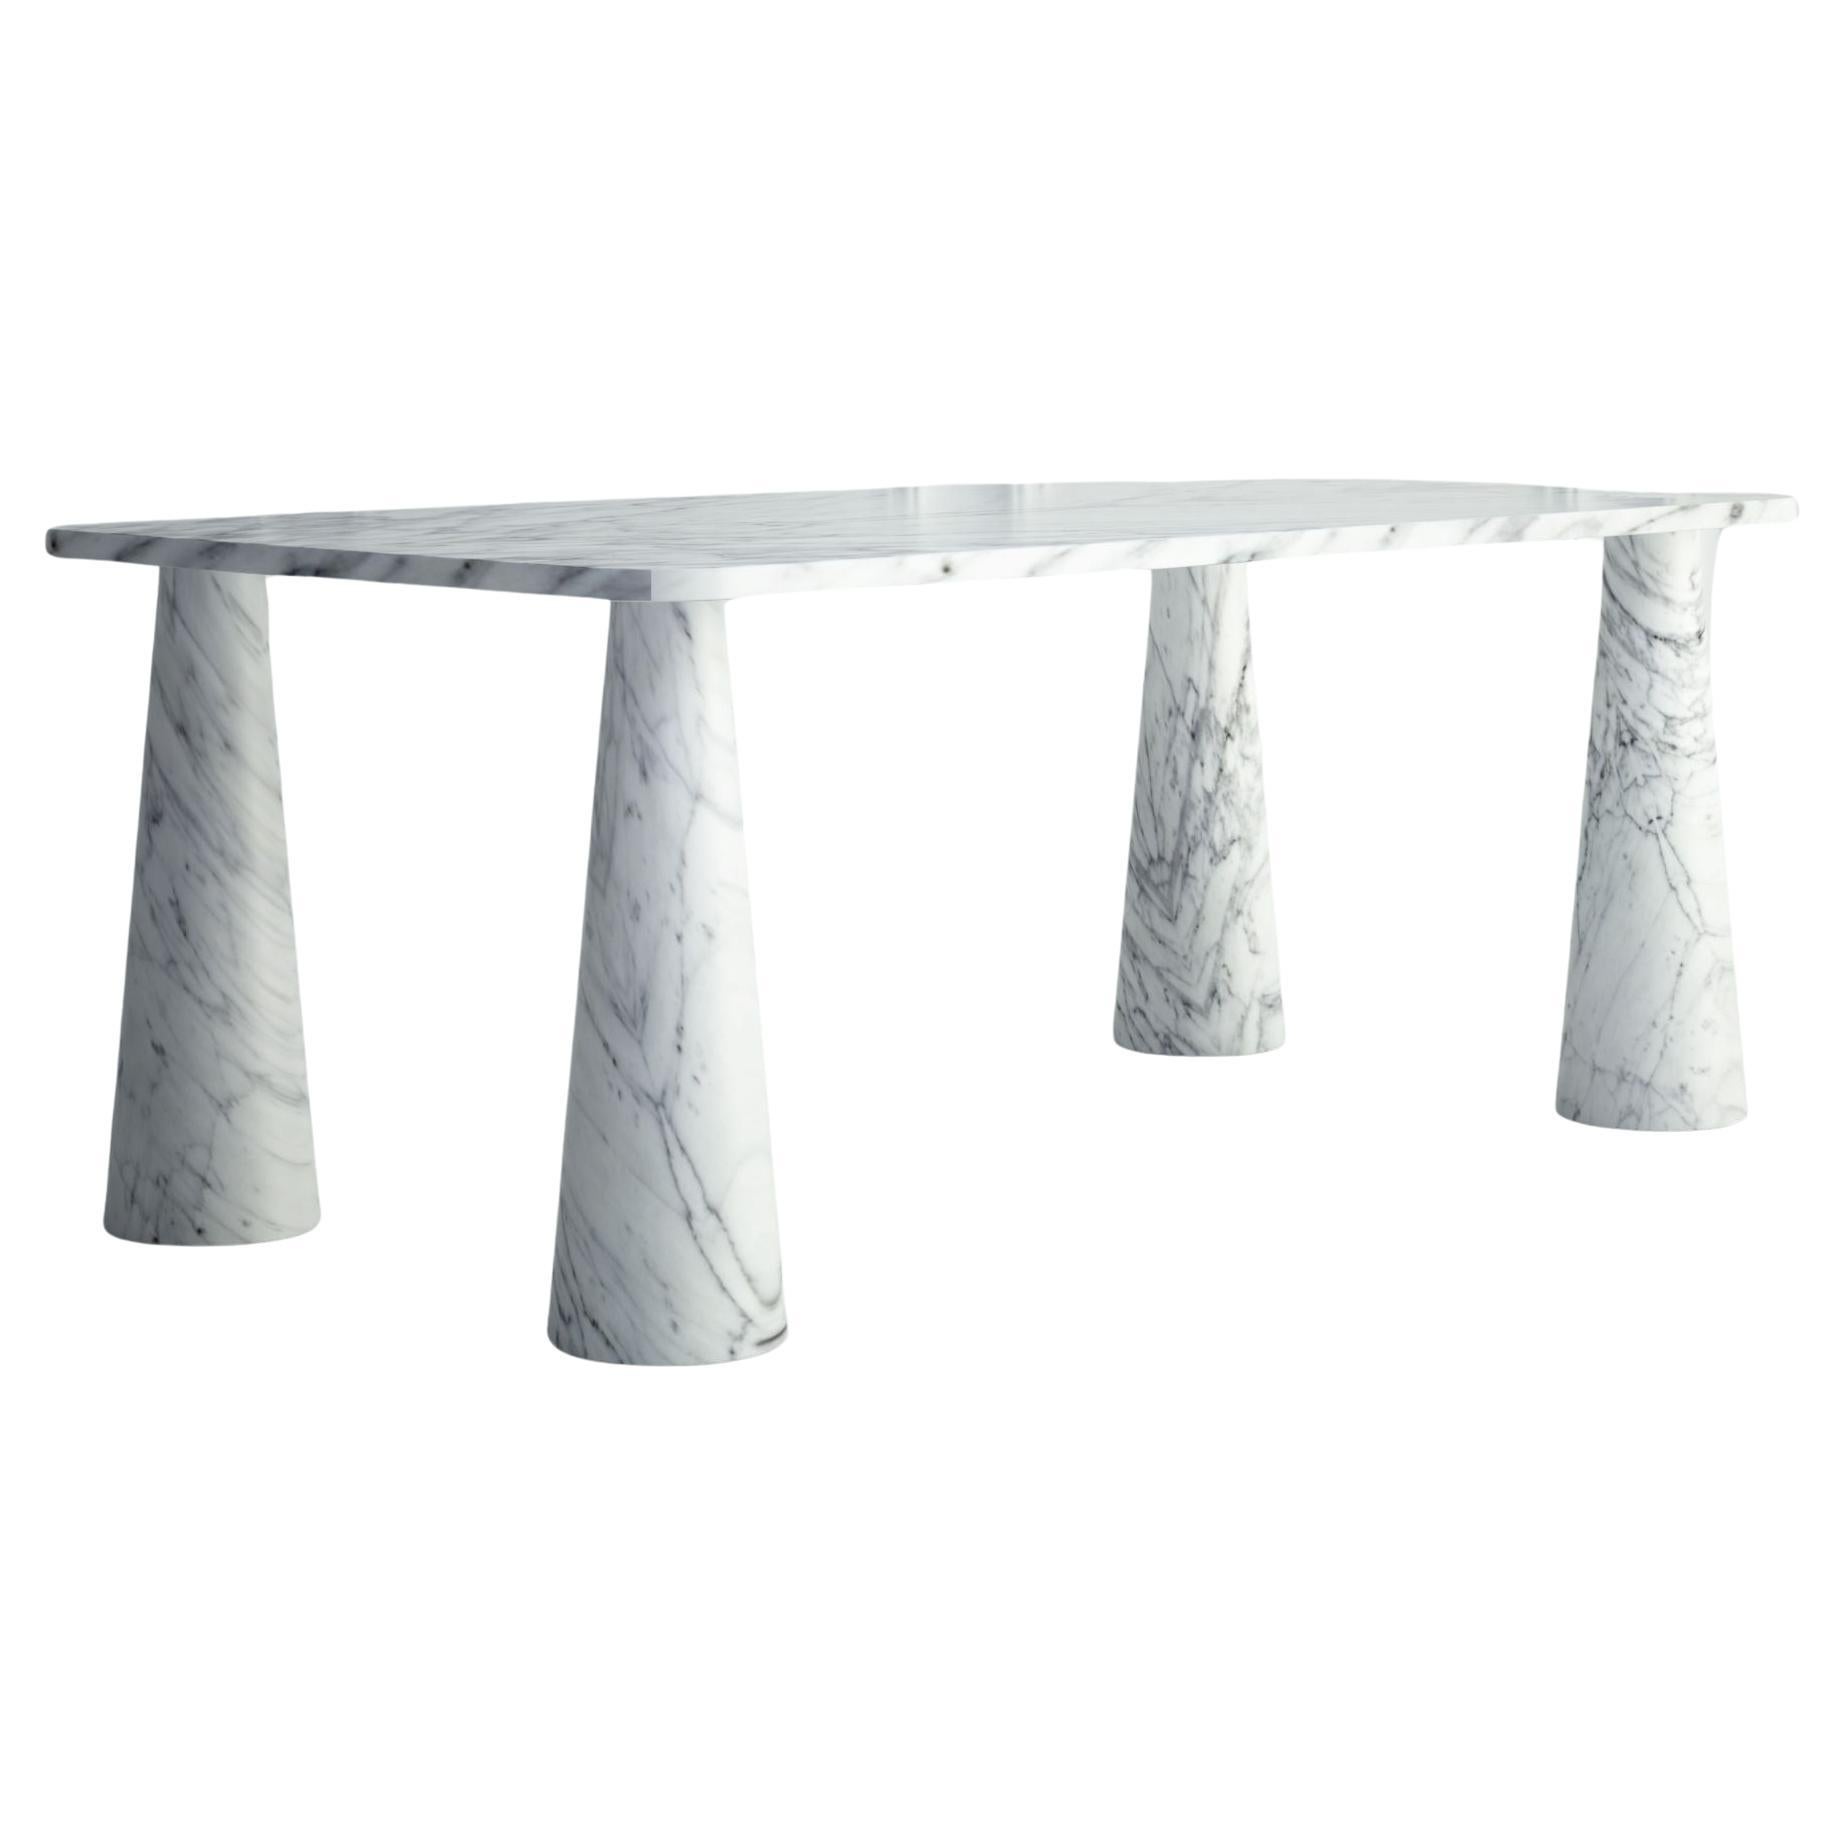 The Simone: A Modern Stone Dining Table with a Rectangular Top and Round Legs